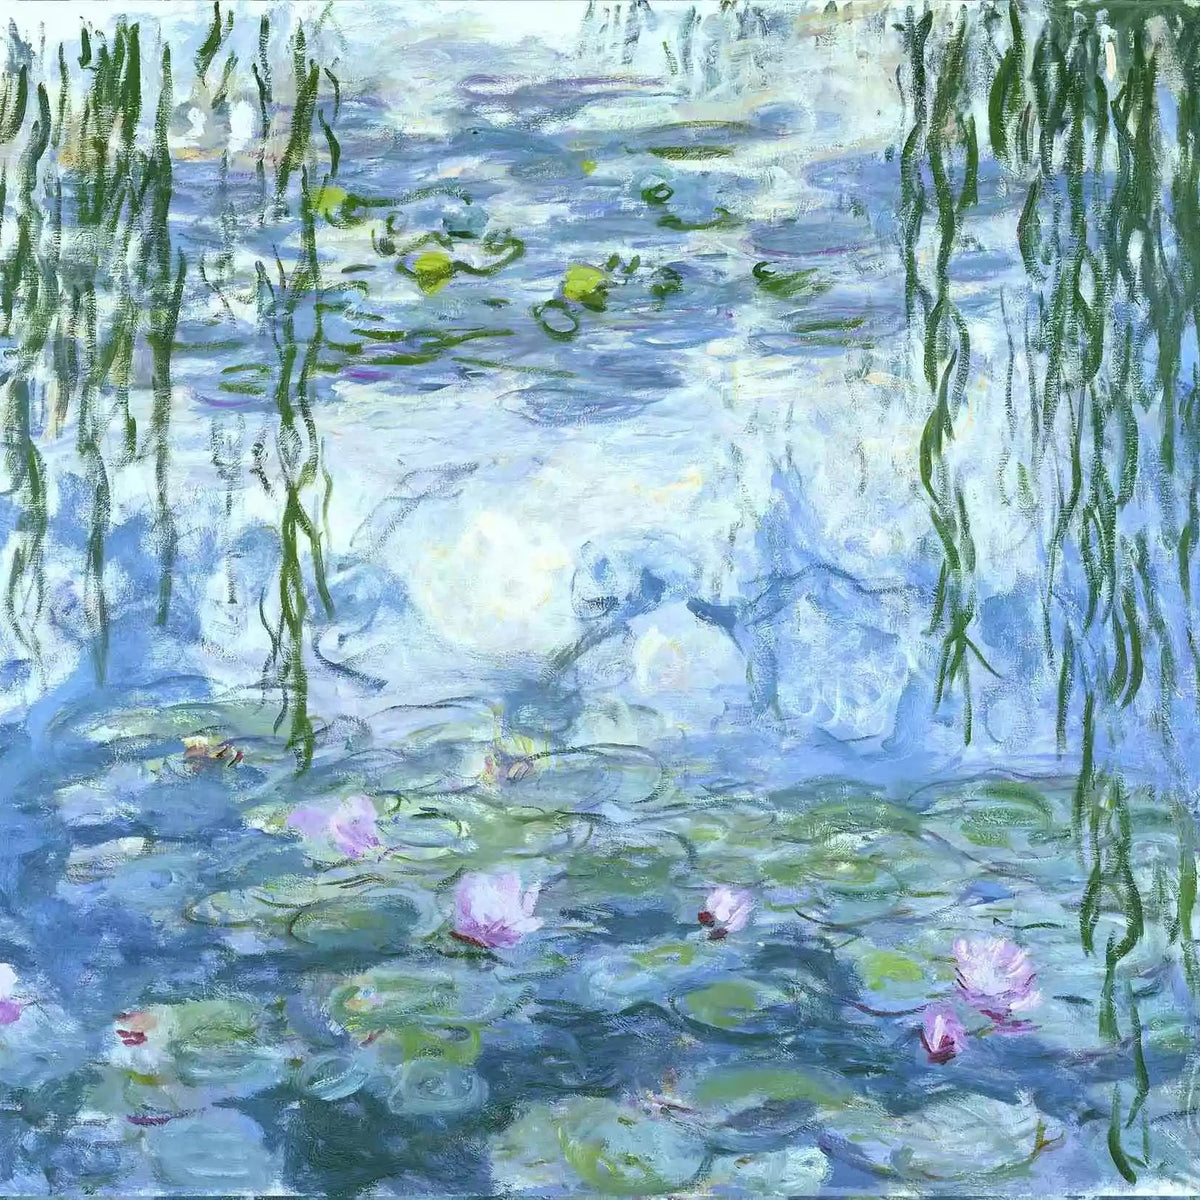 Water Lilies, Nympheas (1916) - Diamond Painting-Diamond Painting-16"x20" (40x50cm)-Canvas by Numbers US